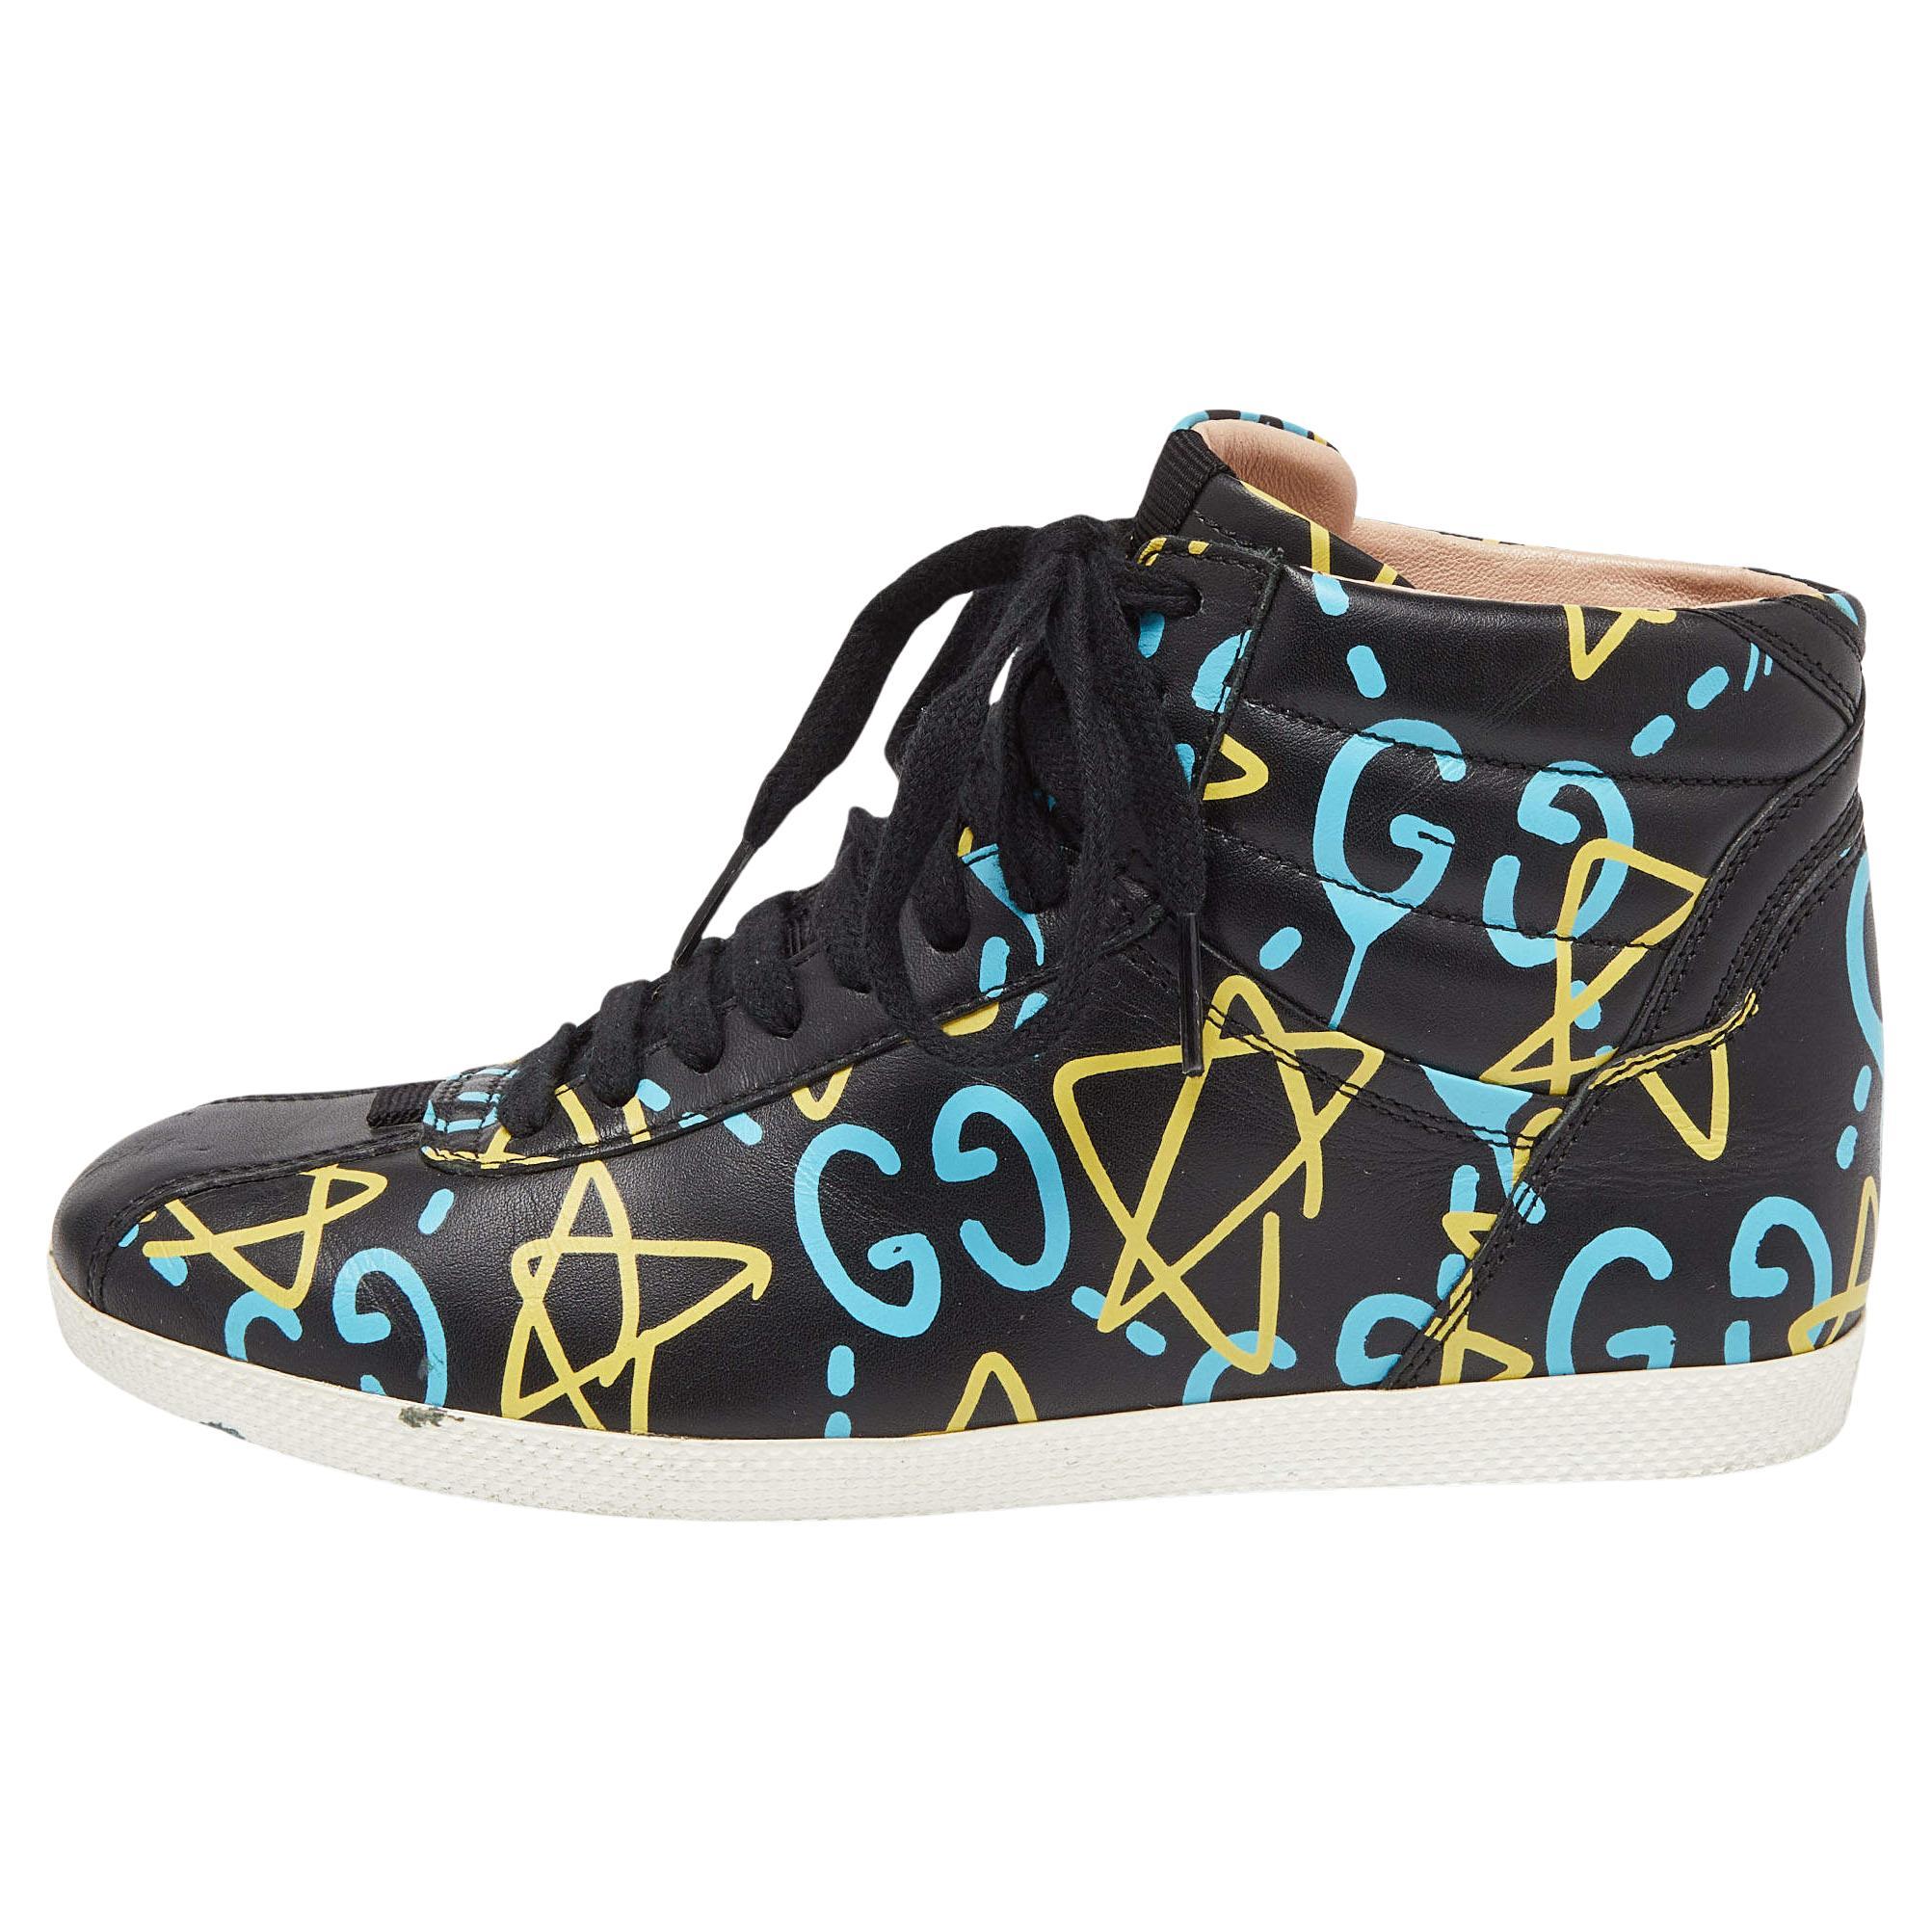 Gucci Black Graffiti Leather Ghost High Top Sneakers Size 35.5 For Sale